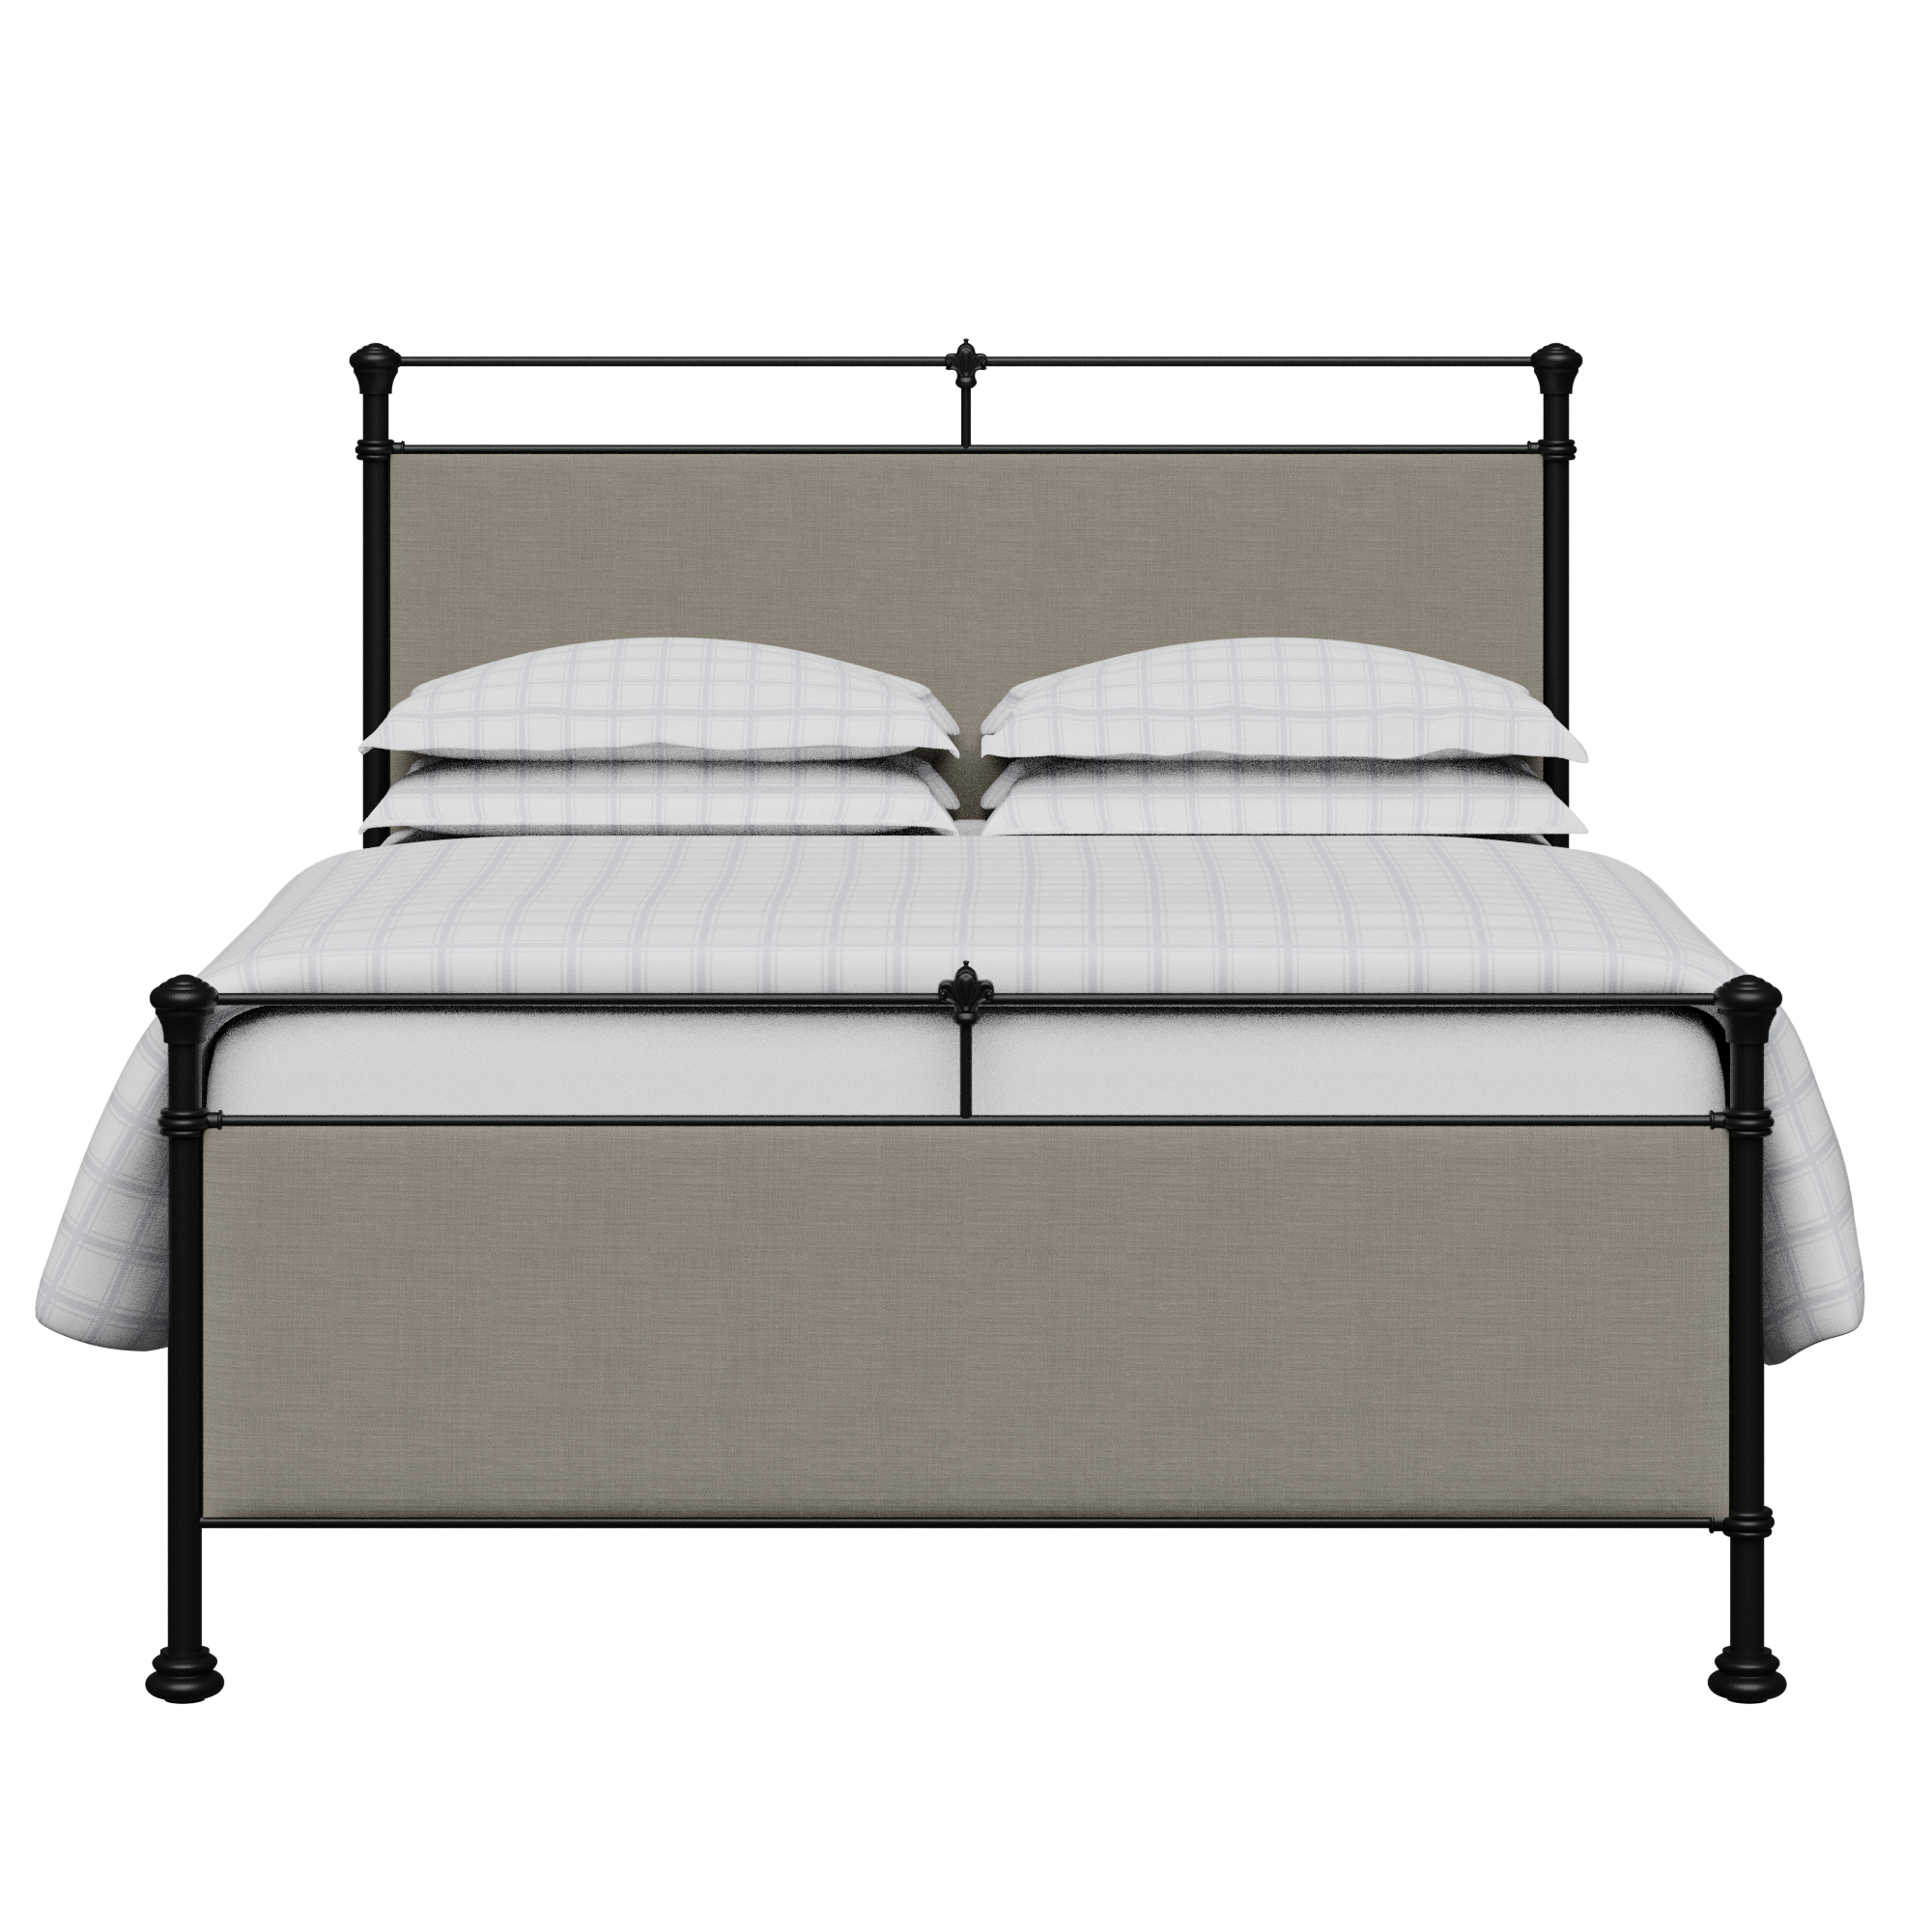 Nancy iron/metal upholstered bed in black with grey fabric